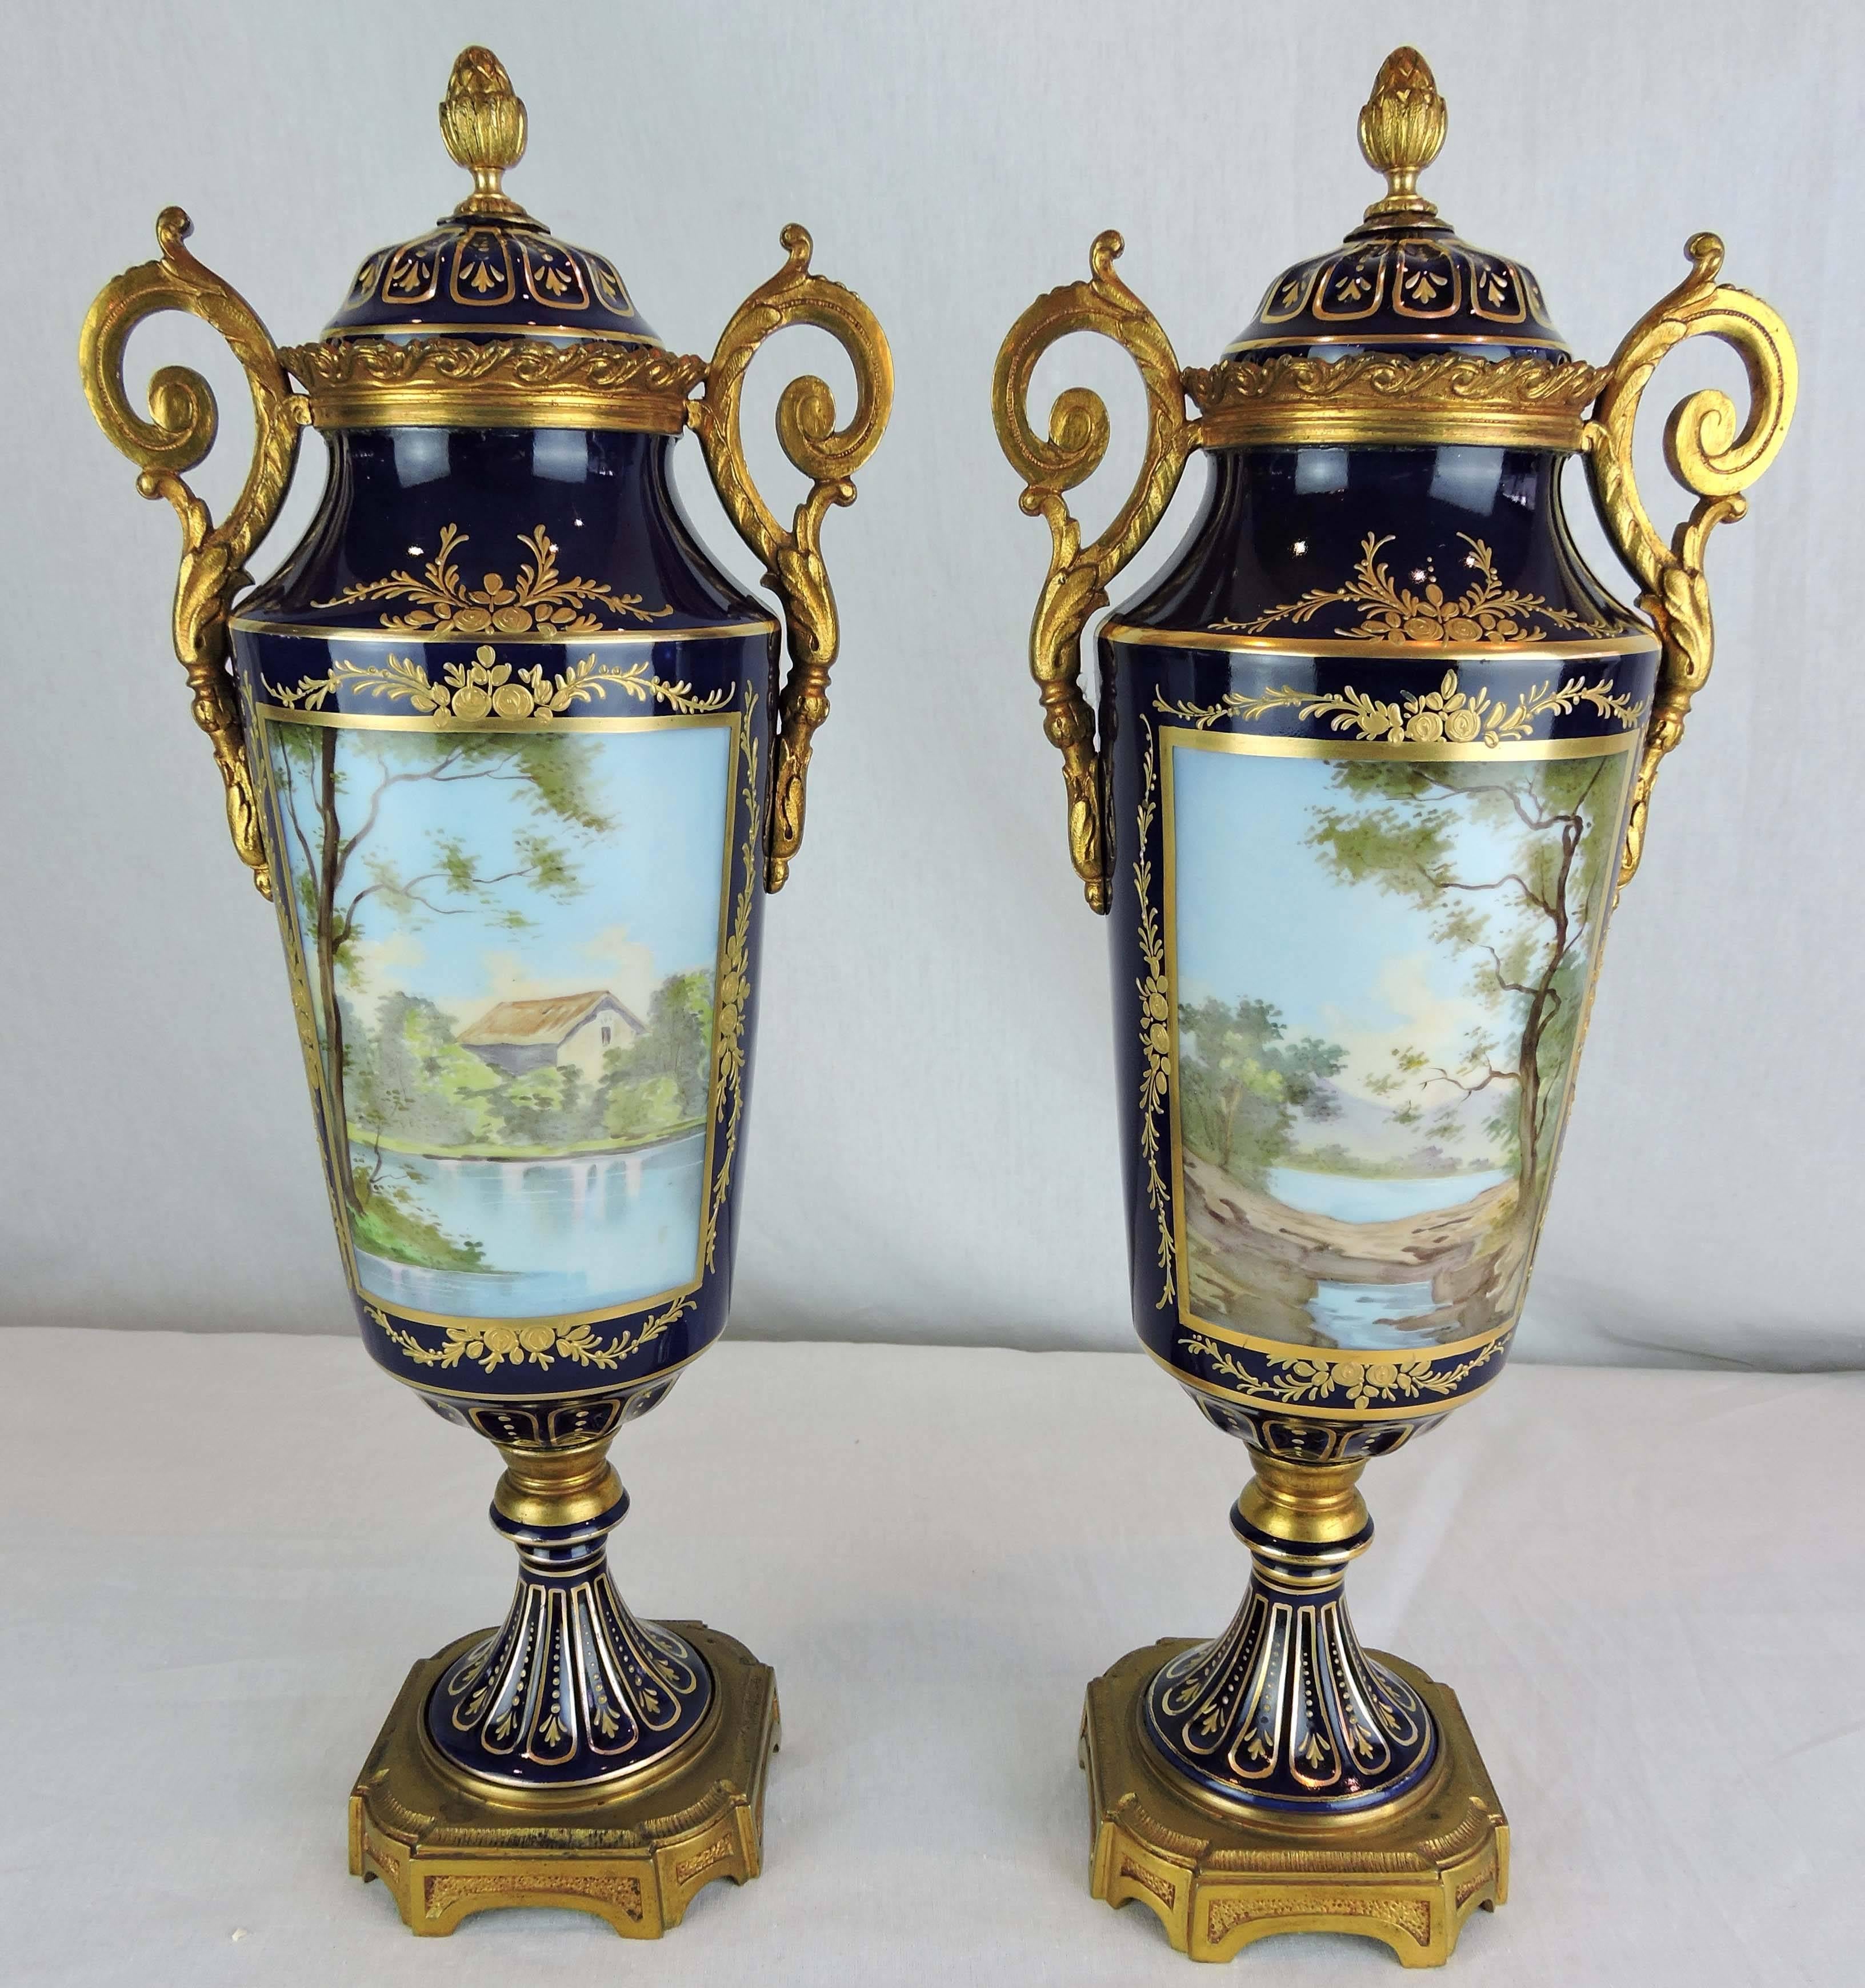 This pair of elongated baluster urns with inset pedestal feet, is decorated in the manner of Sevres, with cobalt blue bodies overlaid with ornate linear and foliate gilt, circa 1890.

Panelled, dome-shaped lids, crowned with bronze finials are